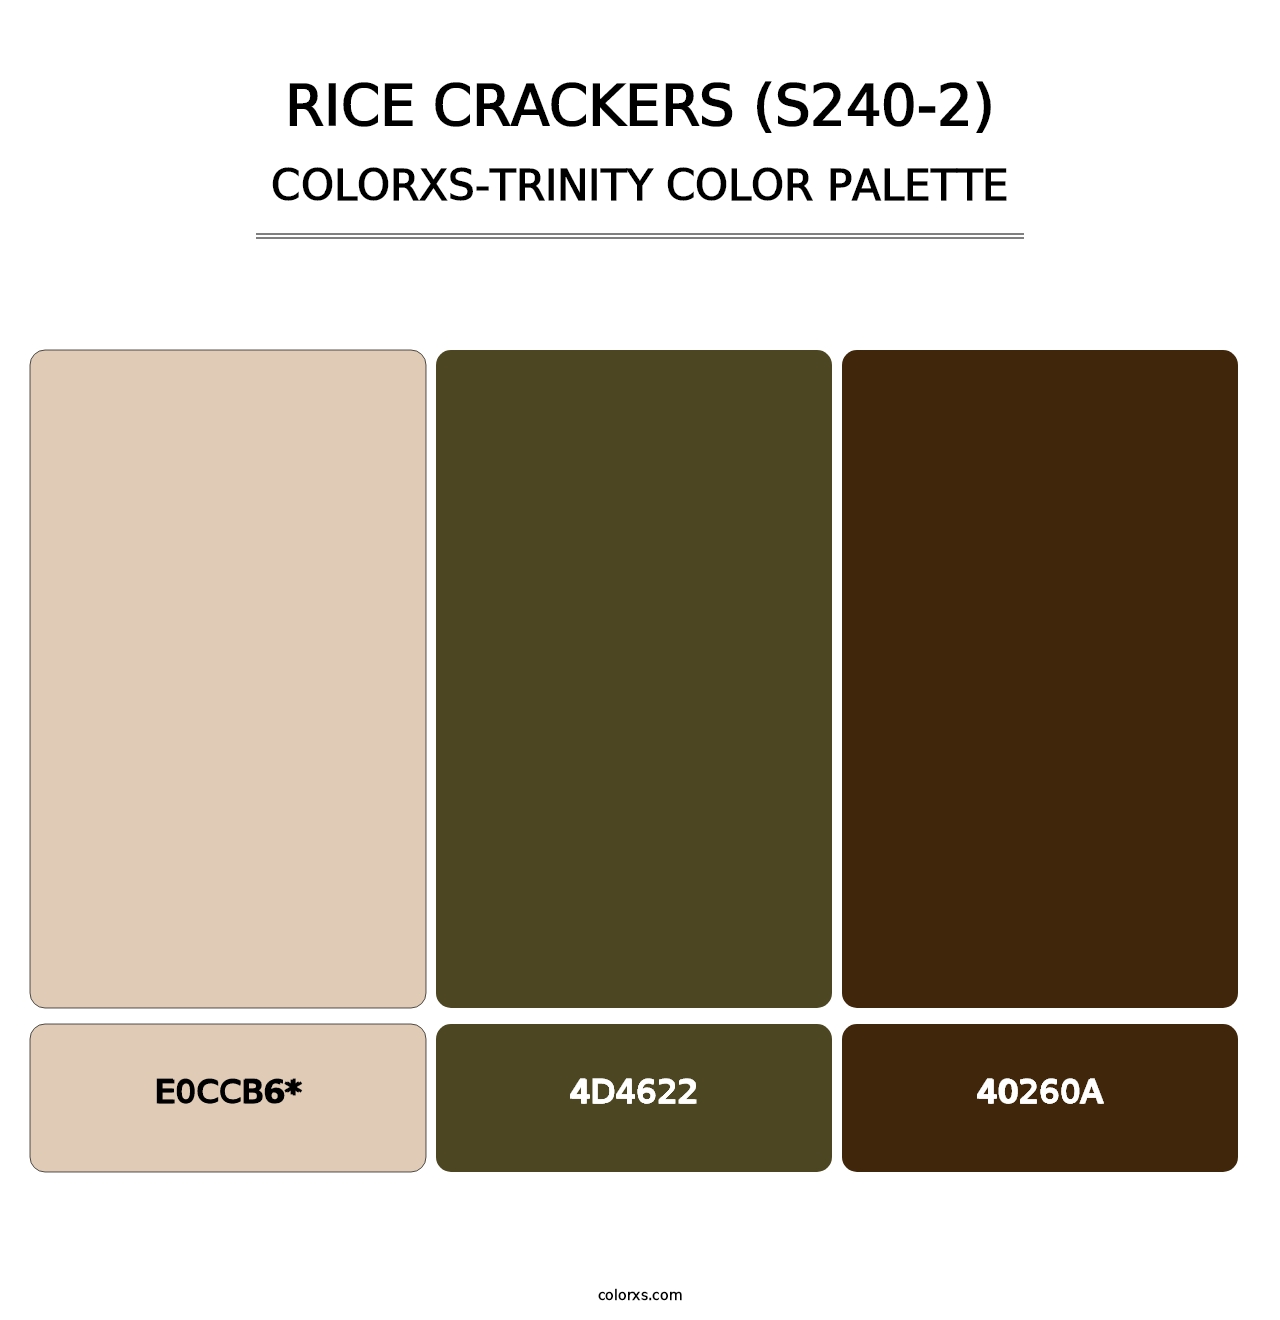 Rice Crackers (S240-2) - Colorxs Trinity Palette